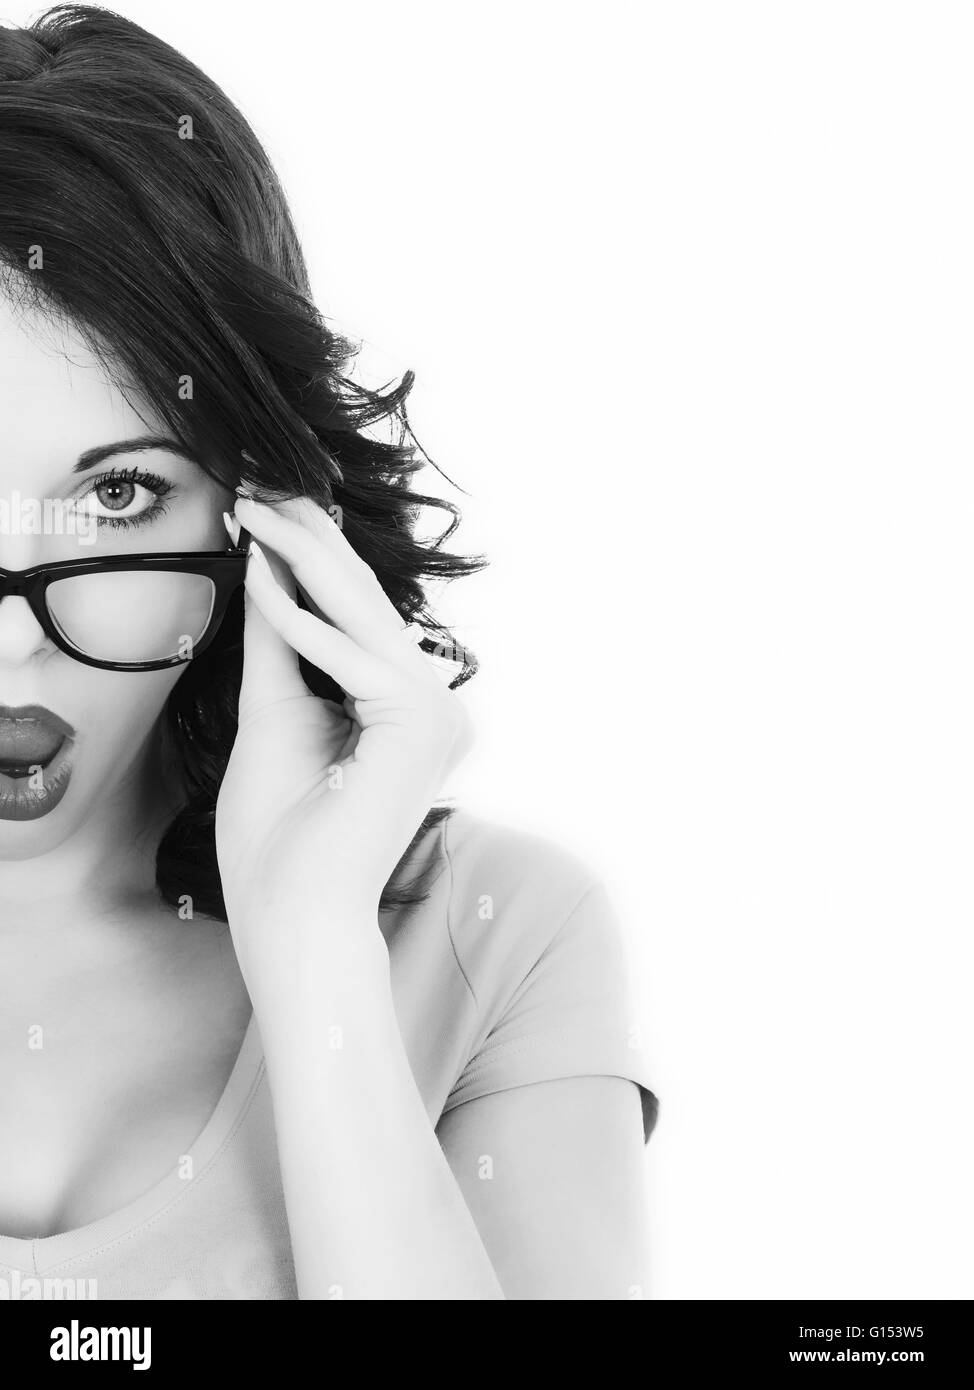 Portrait of a Woman Wearing Glasses Looking Shocked With Copy Space Stock Photo